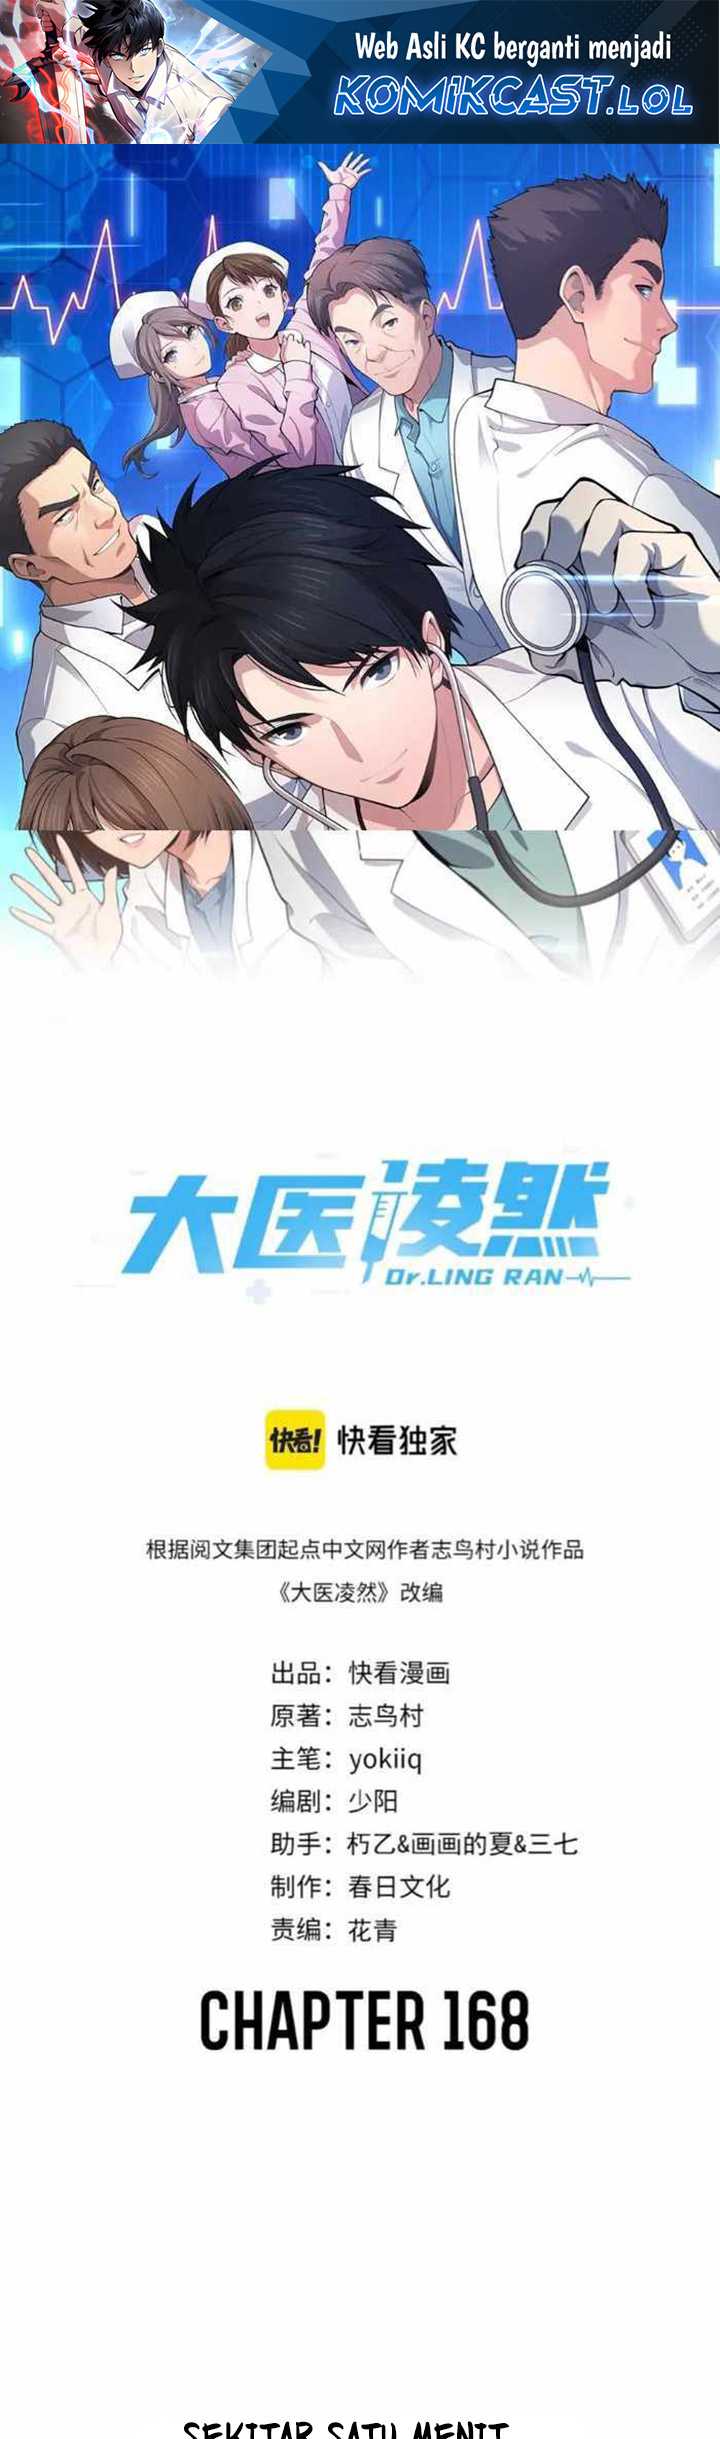 Great Doctor Ling Ran Chapter 168